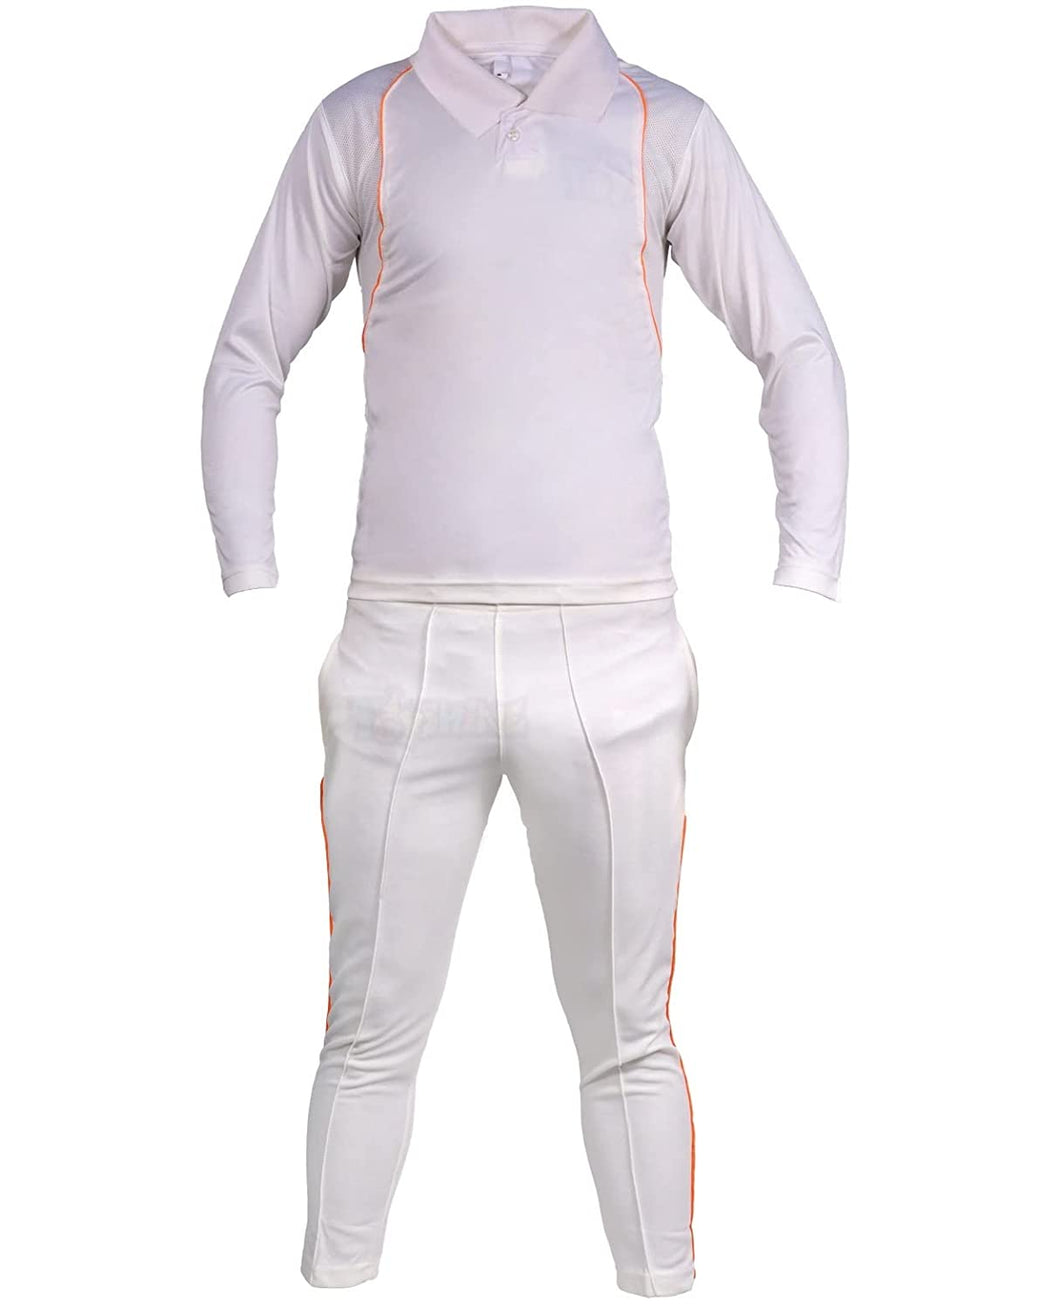 Toyshine Cricket Dress 30 no For (8 to 10 yrs) Kids Cricket Uniform Dress, Cricket OFF-White Color T-Shirt Full Sleeve and Trouser Combo,SSTP (TS-2022)